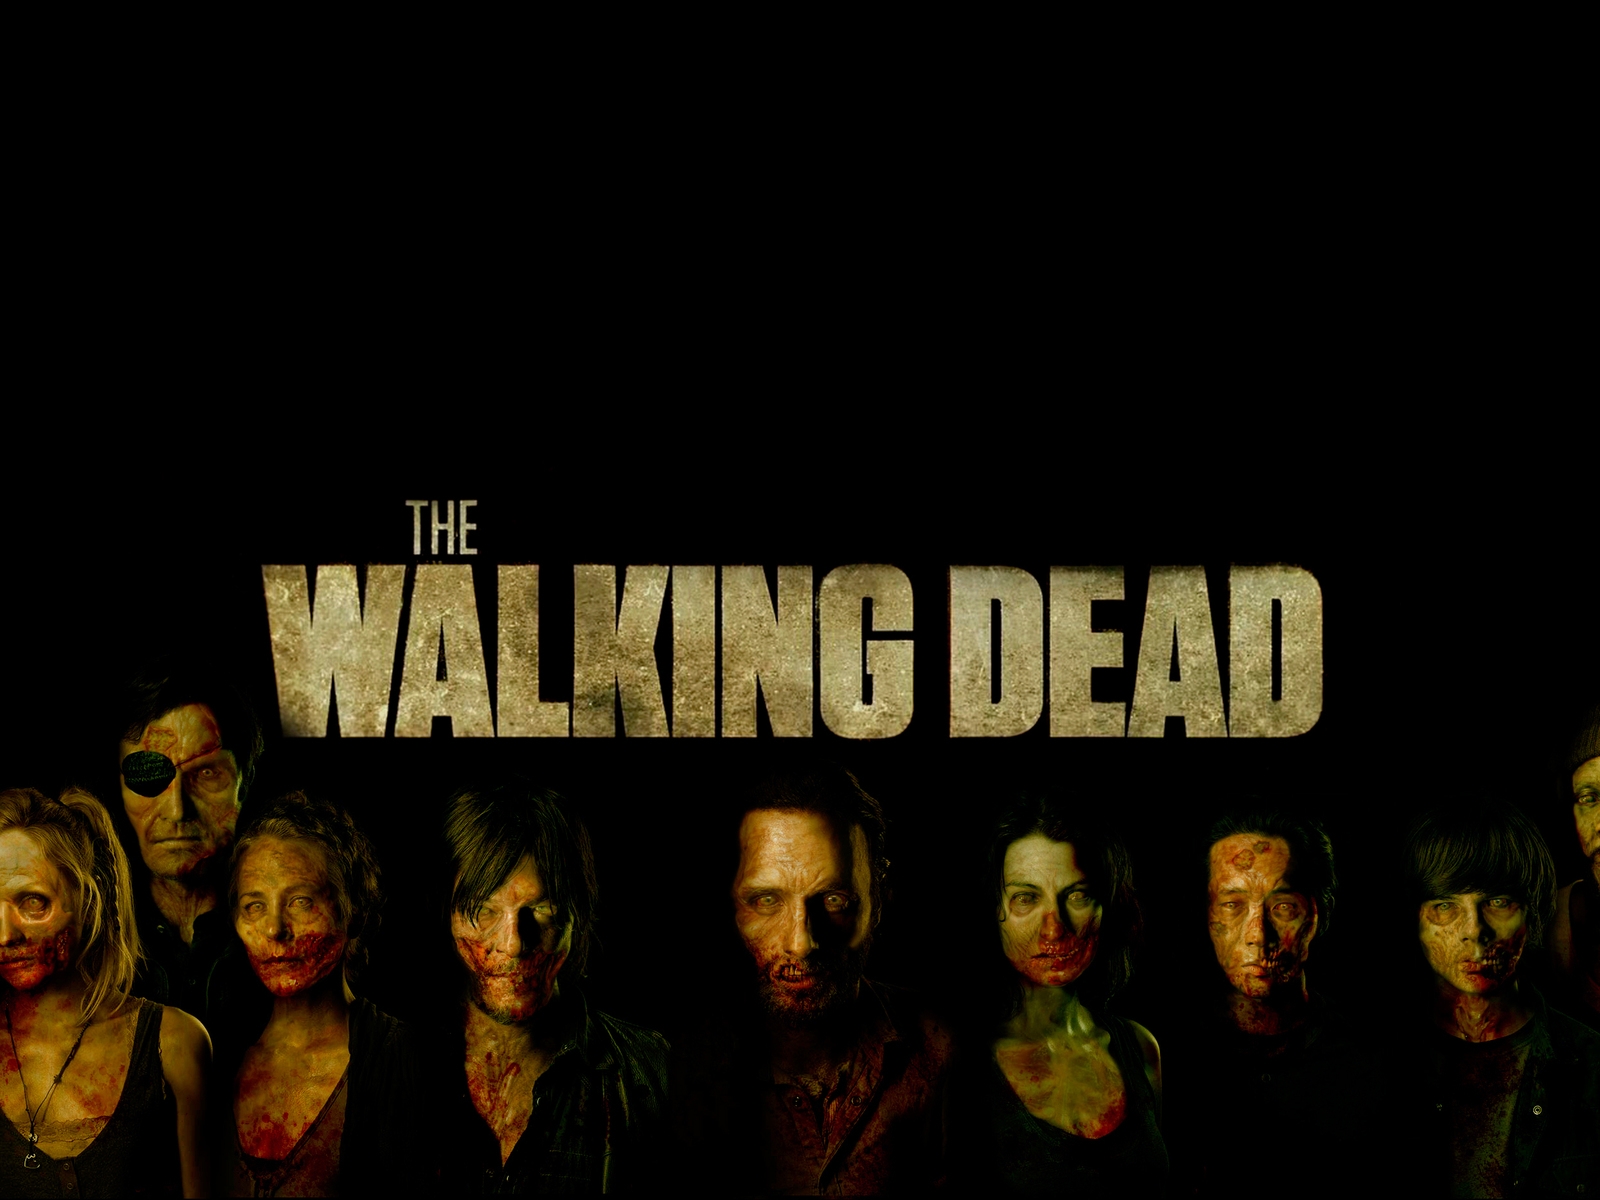 The Walking Dead Poster Art  for 1600 x 1200 resolution